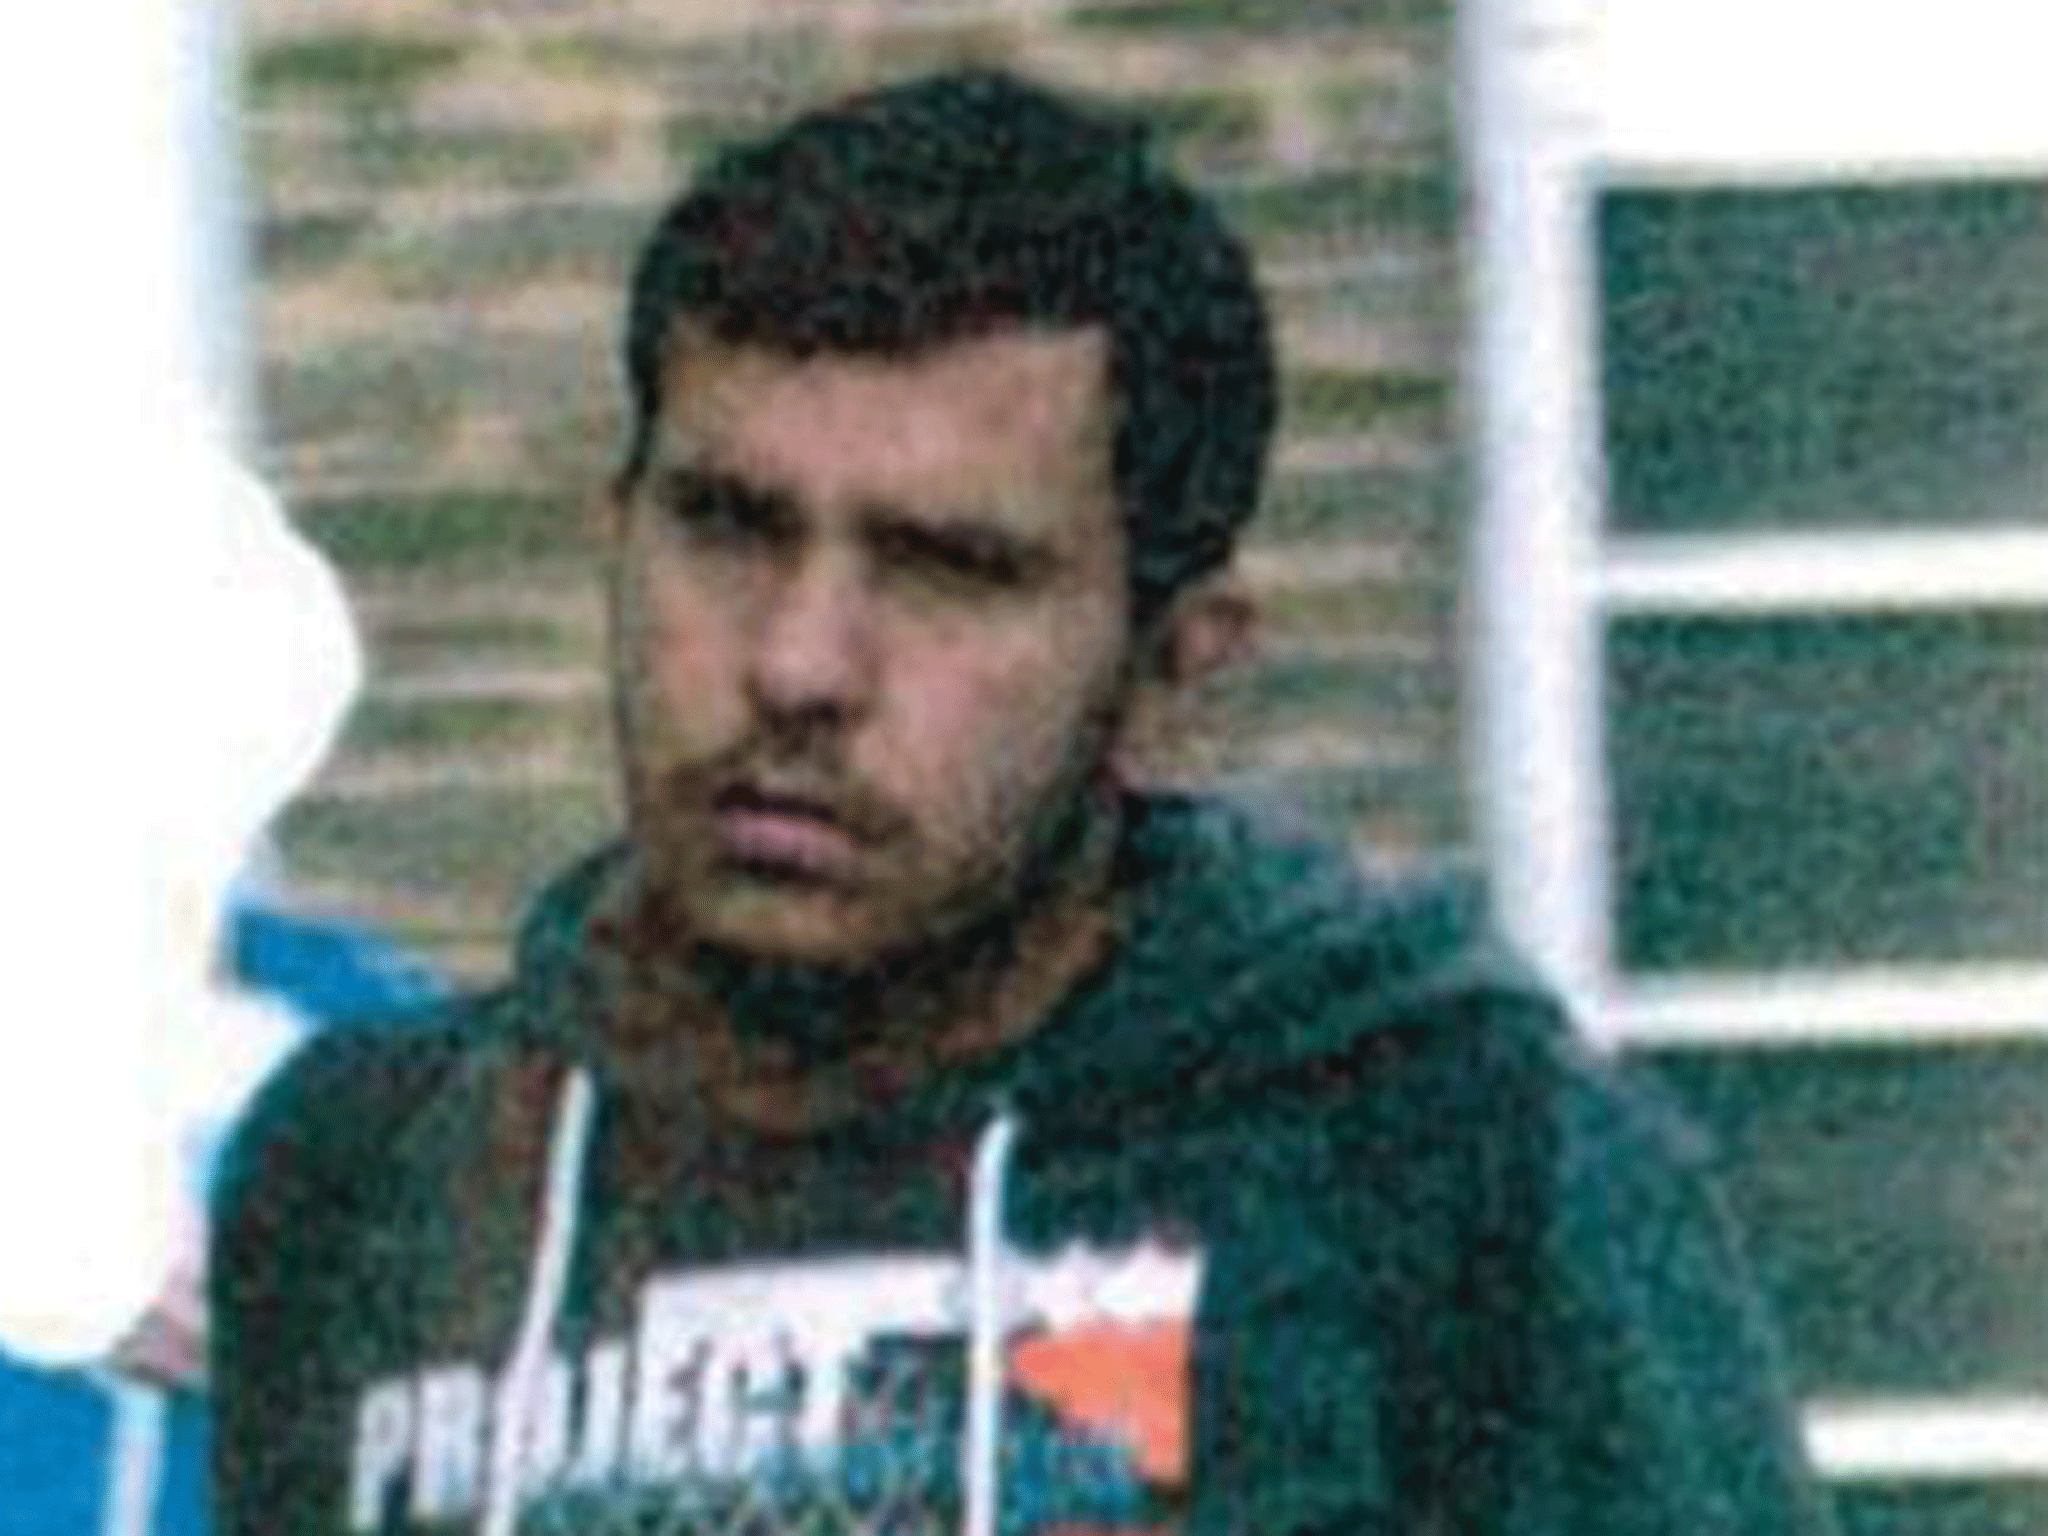 Syrian Jaber Al-Bakr is suspected of planning a terror attack in Germany